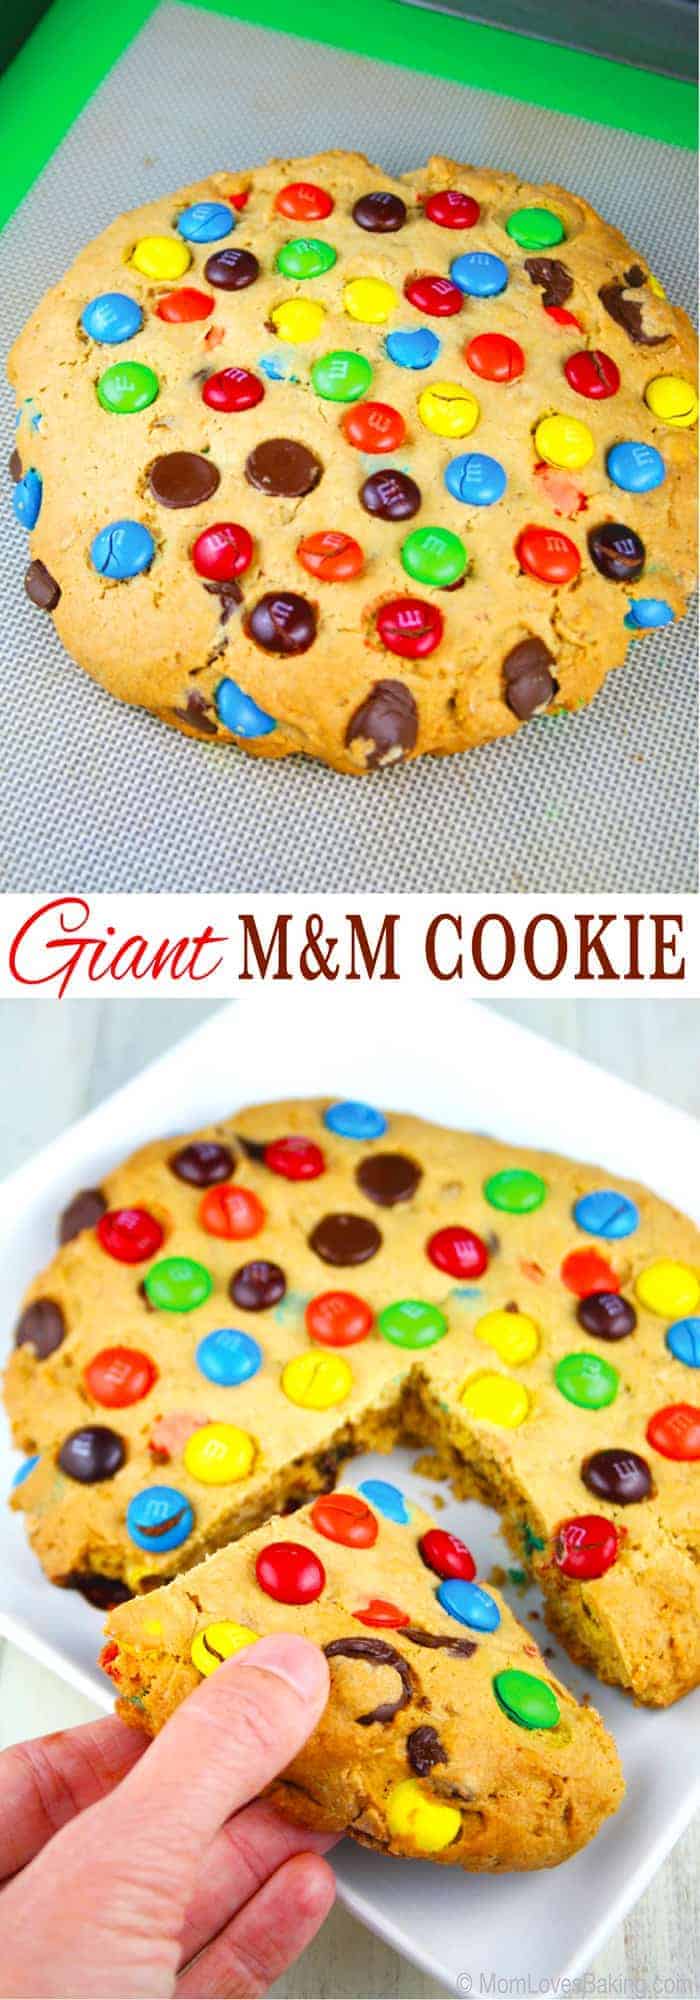 Giant M&M Cookie – Wuollet Bakery